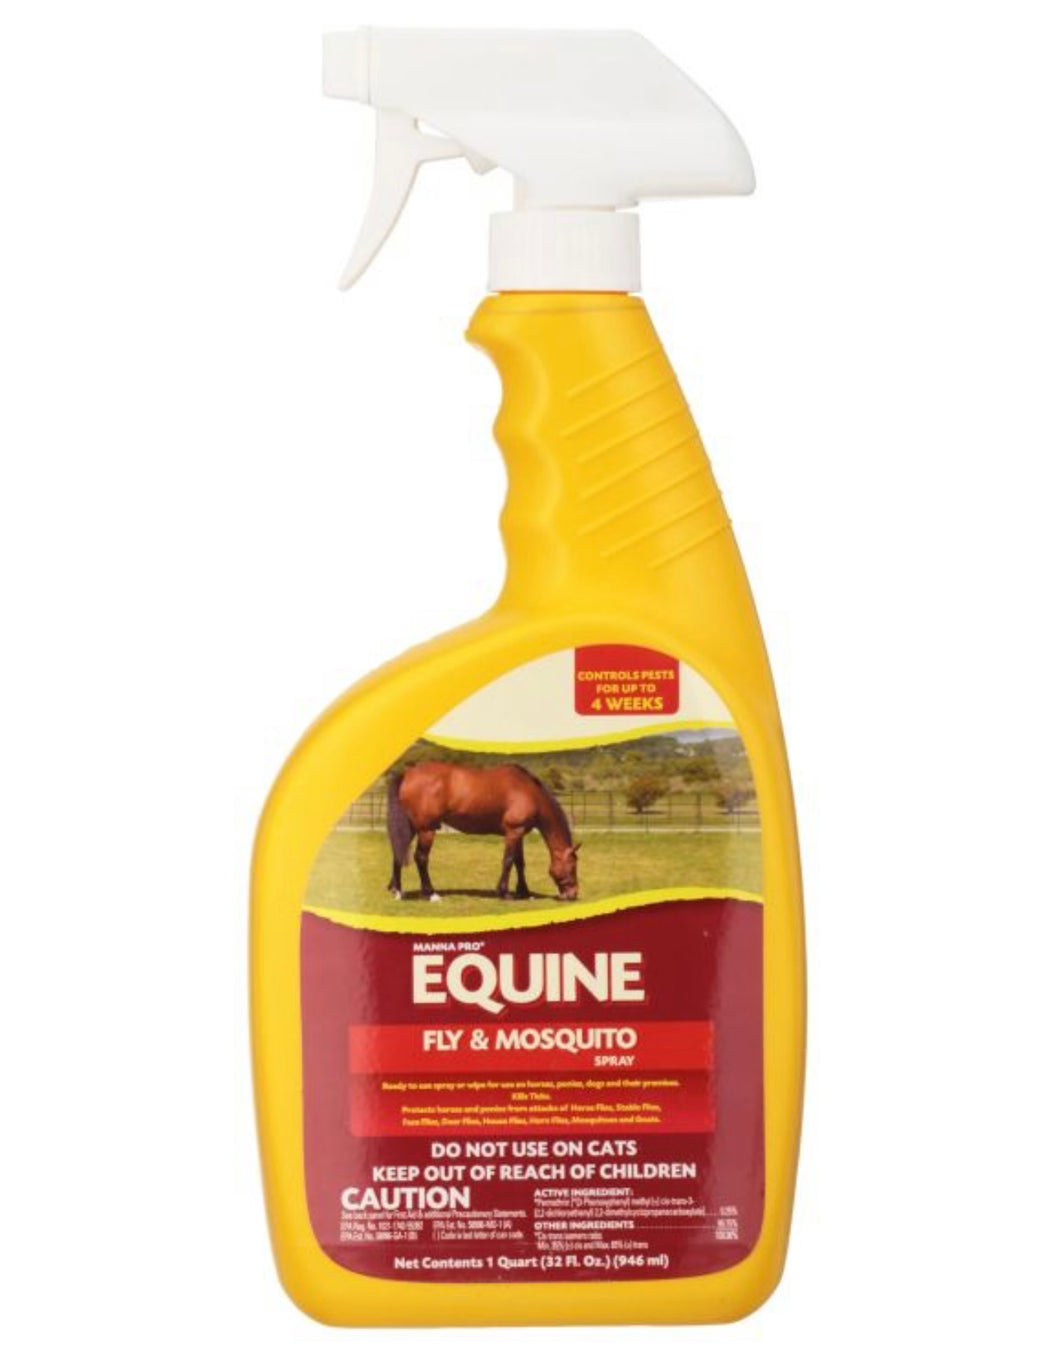 Arrivage 18 juin | Manna Pro | Equine Fly & Mosquito Spray